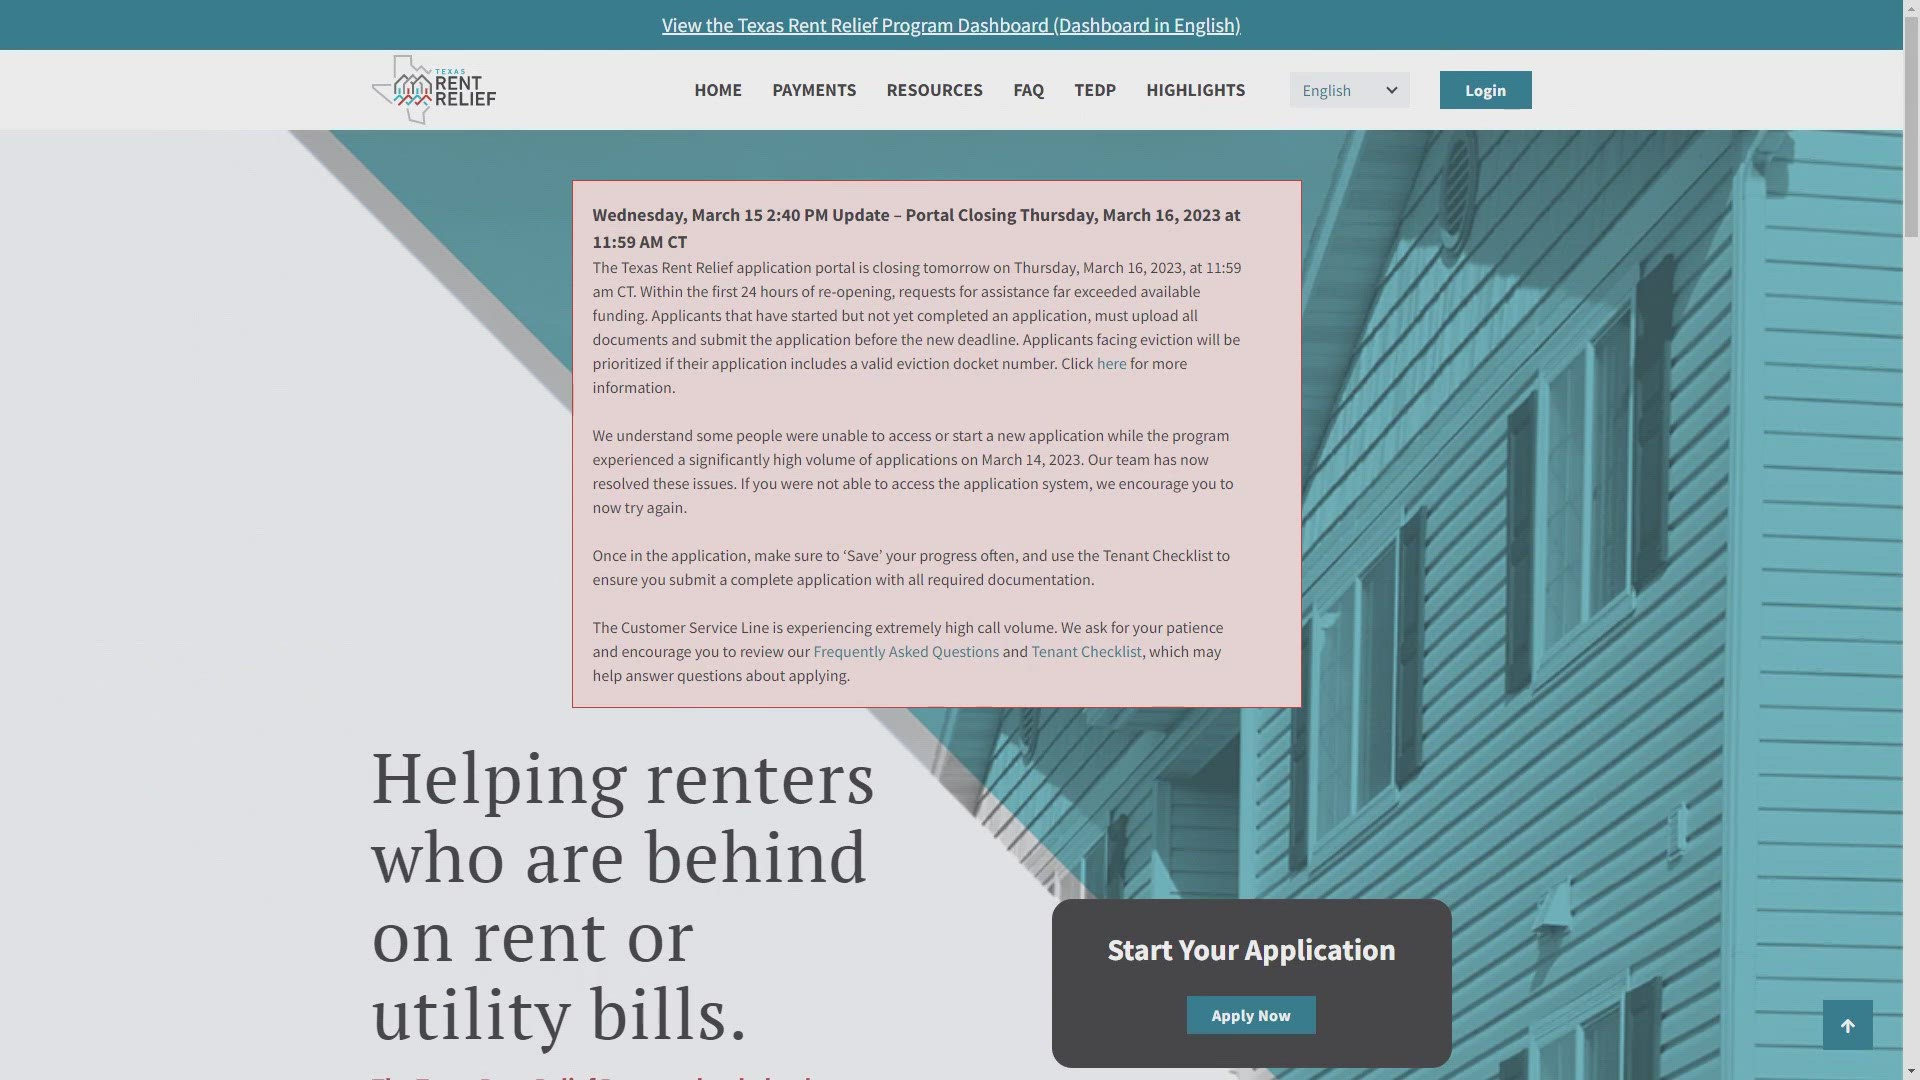 According to the rent relief program's website, requests for assistance in just the first 24 hours of the portal being opened "far exceeded available funding."